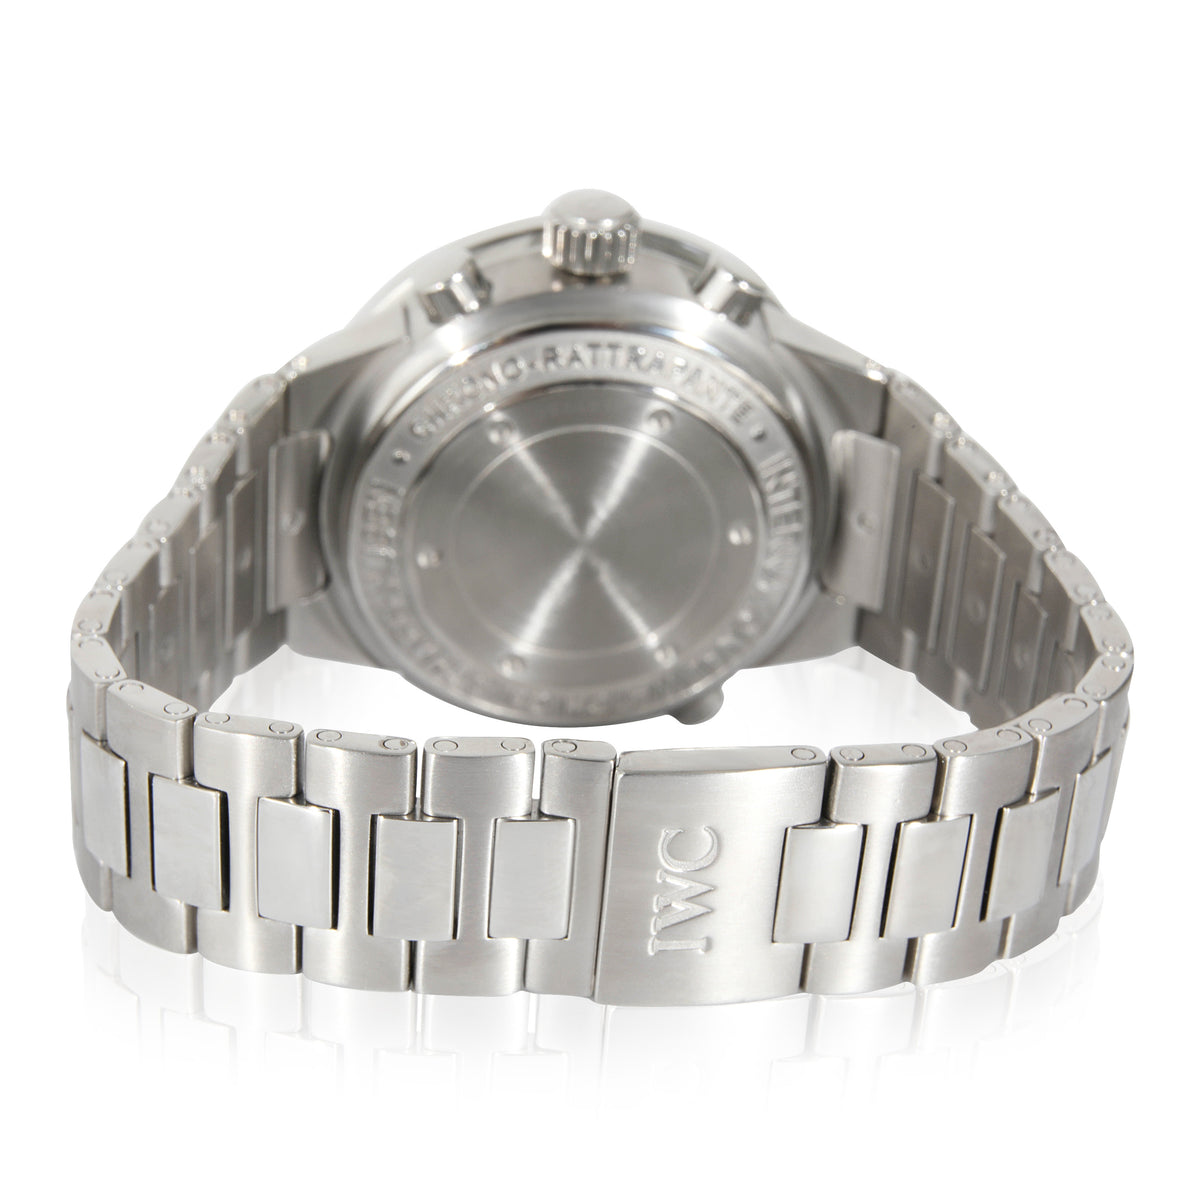 GST Rattrapante IW371518 Men's Watch in  Stainless Steel